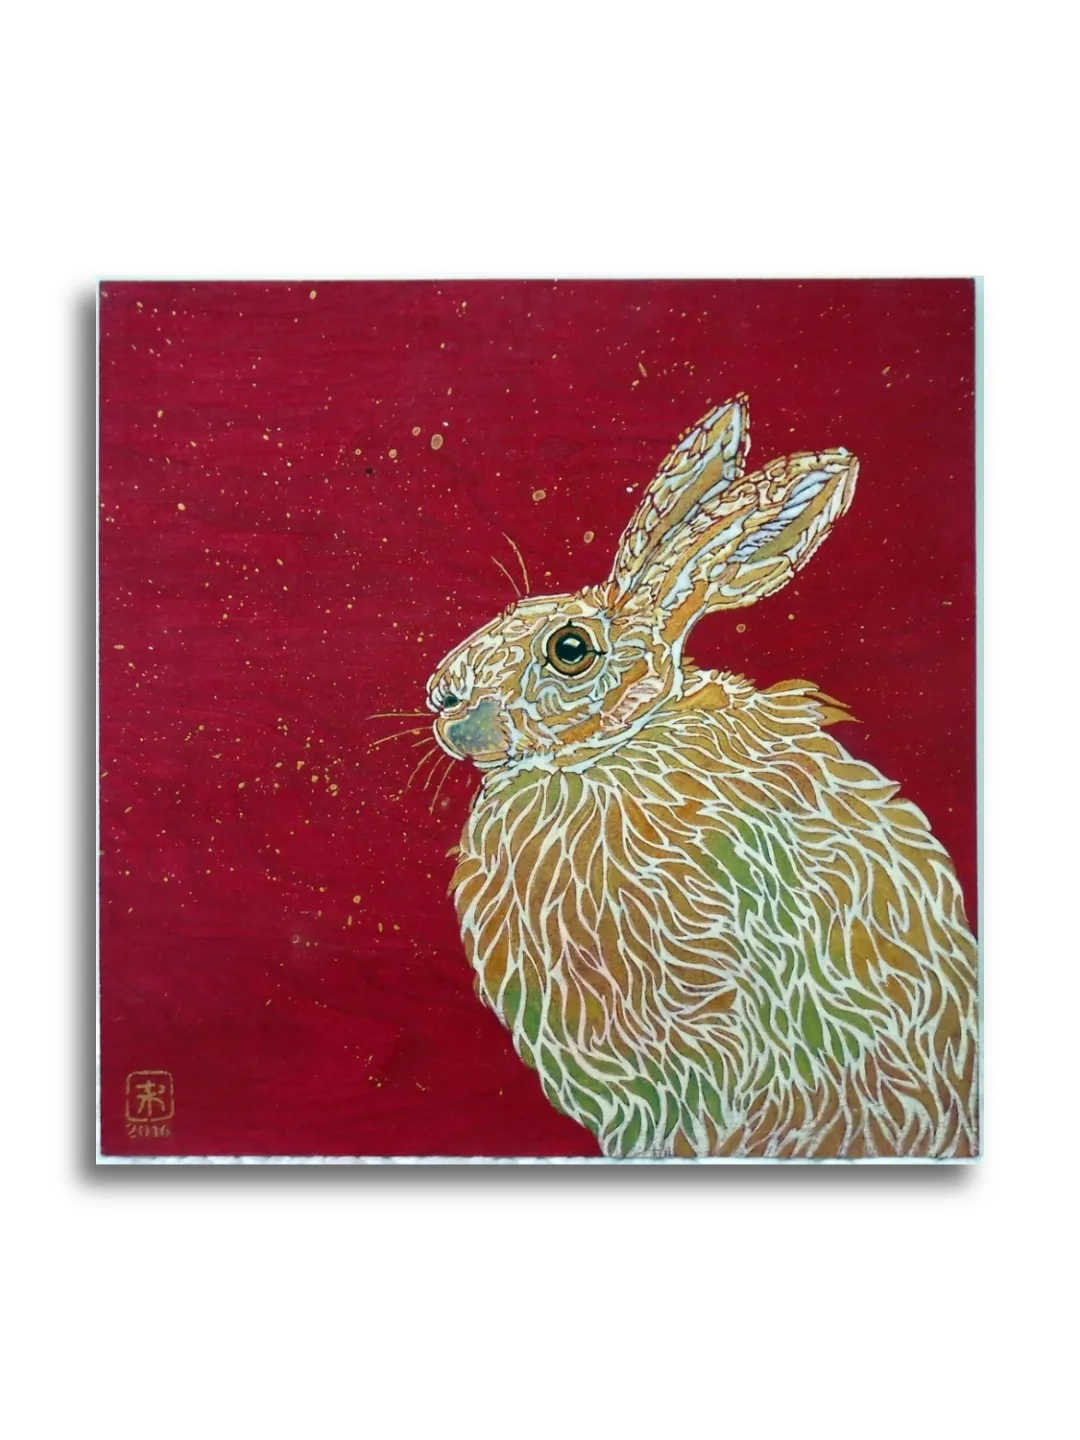 Sitting Hare #2 by Ann Richmond - A stunning, Original stencilled artwork featuring a Hare. Painted in the artist's unique style... Framing available.